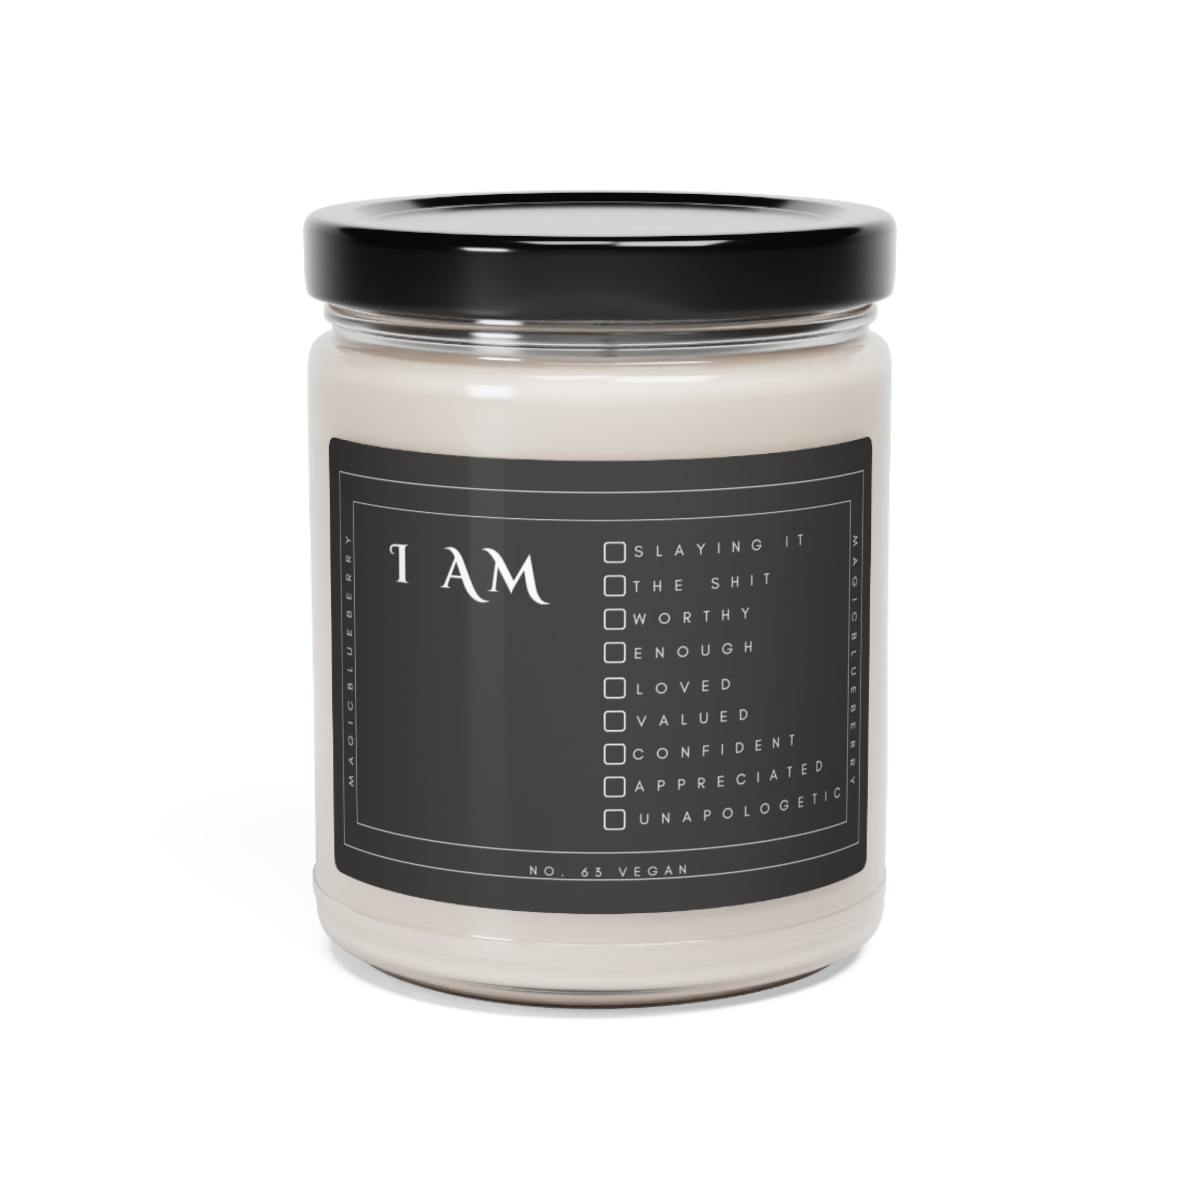 I AM, Scented Vegan Soy Wax Candles, Clear Jar Candle, Spell Candles, Sassy Candle, Vegan Candle, Cotton Wick Candle, Home Deco product thumbnail image